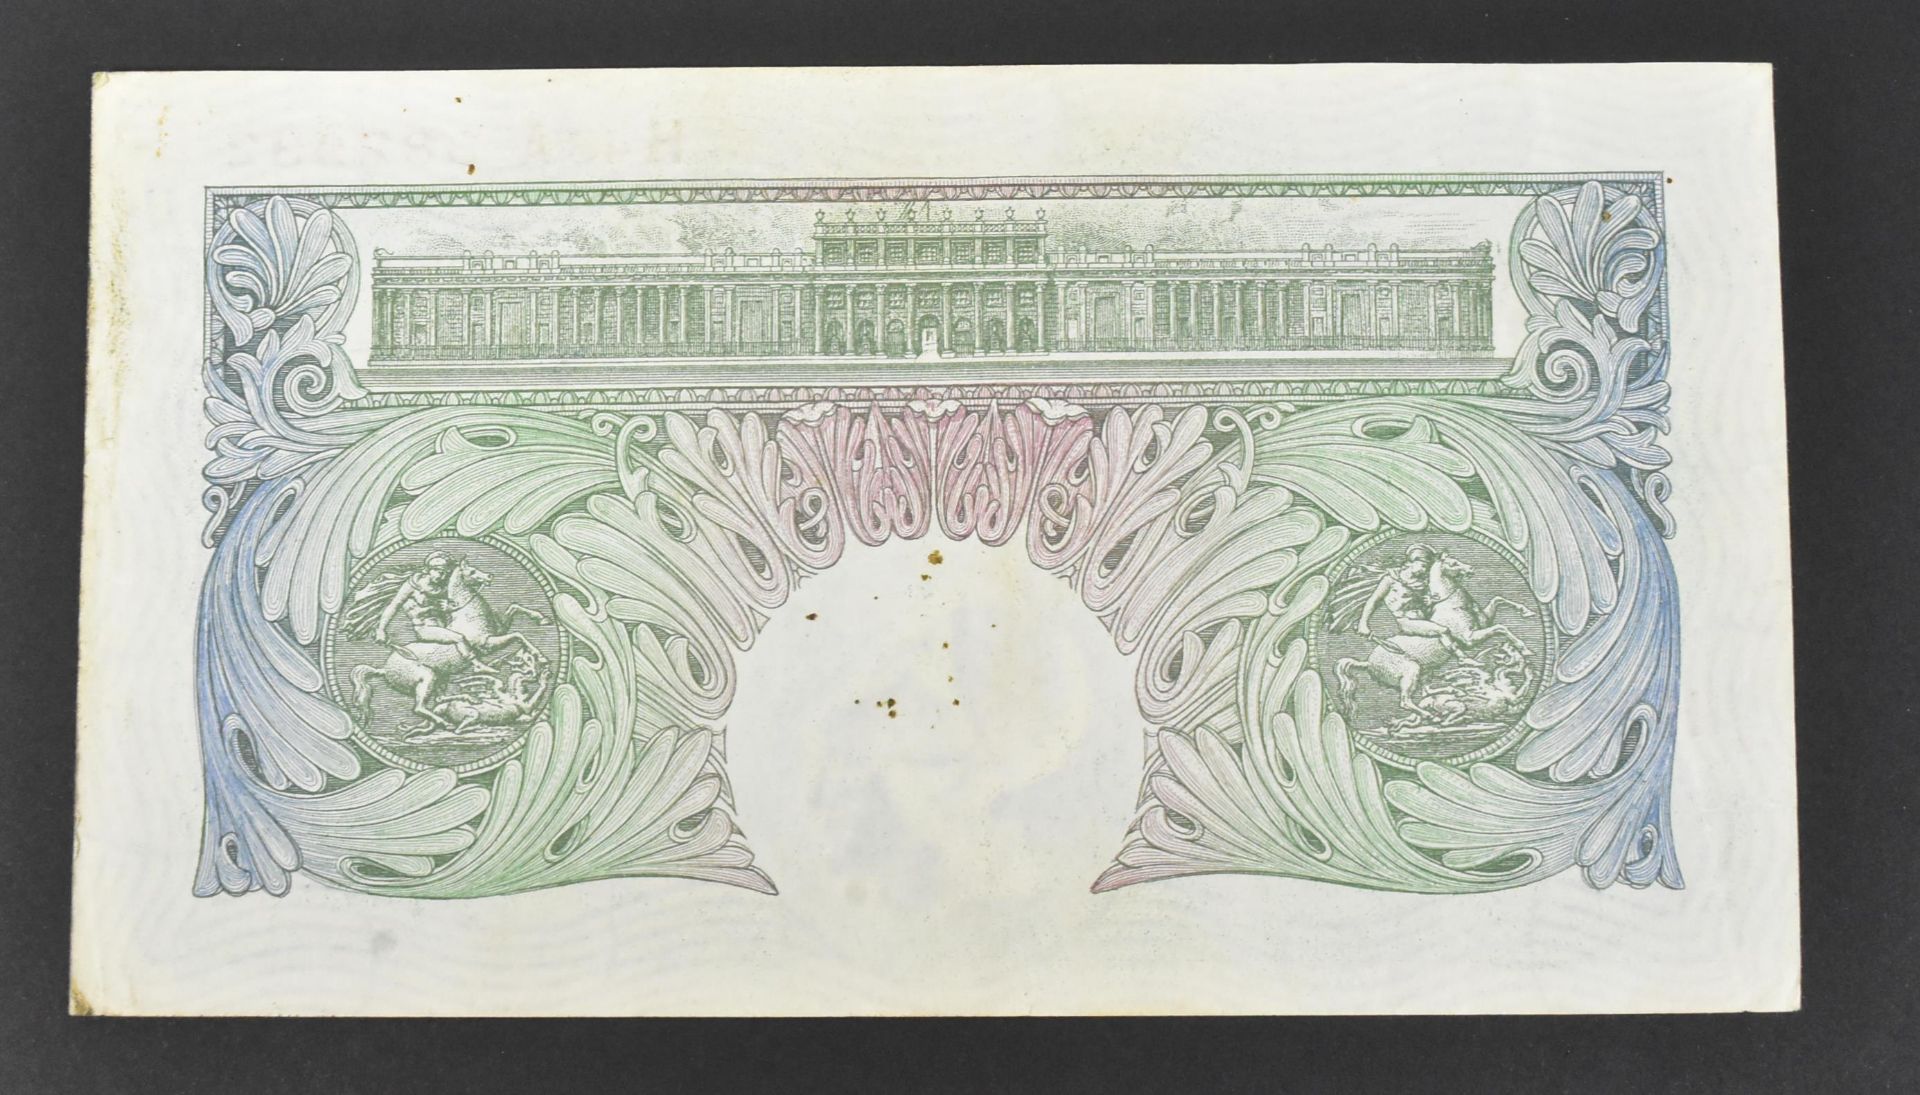 COLLECTION BRITISH UNCIRCULATED BANK NOTES - Image 31 of 61